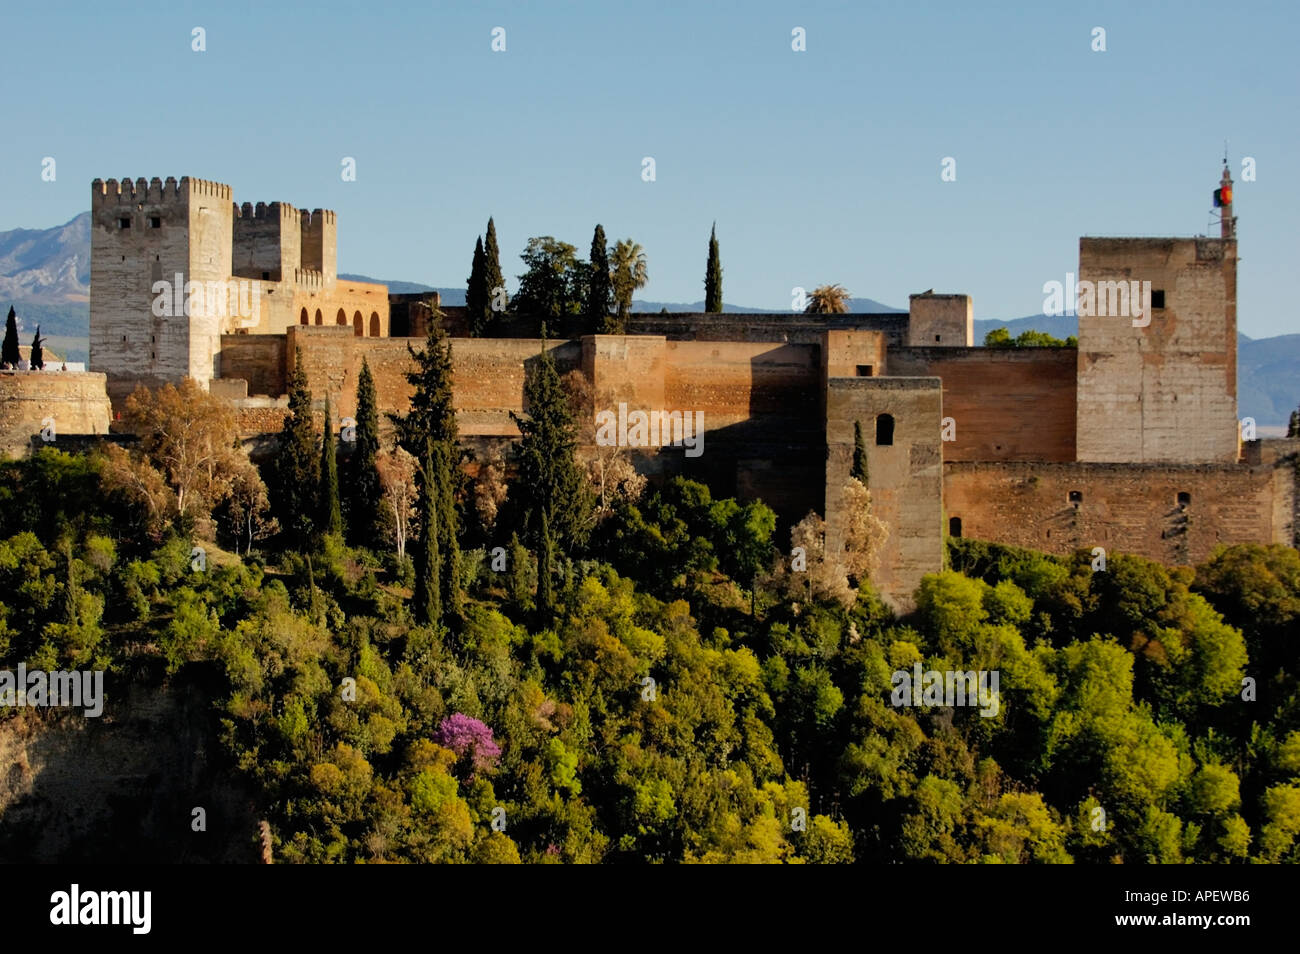 Alhambra Palace - View of Alcazaba citadel and the Alhambra Palace from the Plaza of St. Nicholas, Granada, Andalucia, Spain. Stock Photo